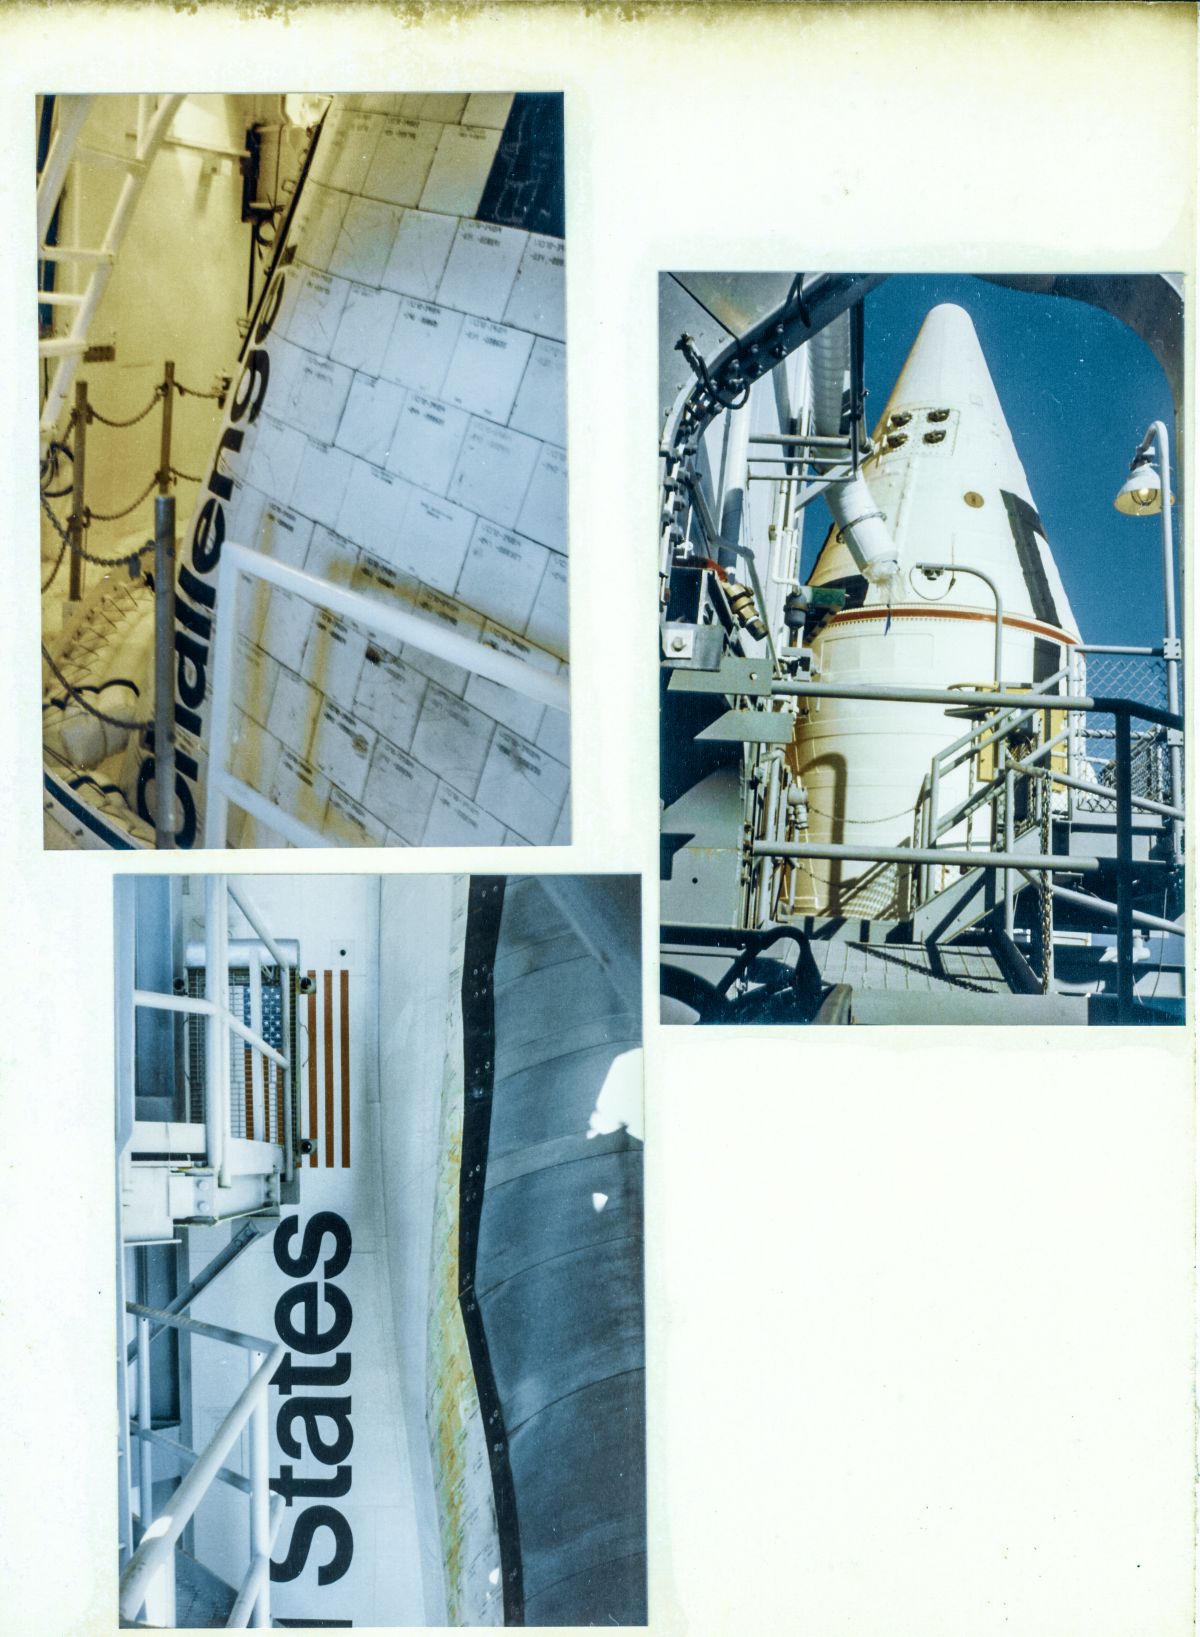 The Space Shuttle Challenger, mated to the RSS, as it stood on Launch Complex 39-B, in the last week of 1985. This would be the first Shuttle launch off of B Pad, scheduled for late-January, 1986.